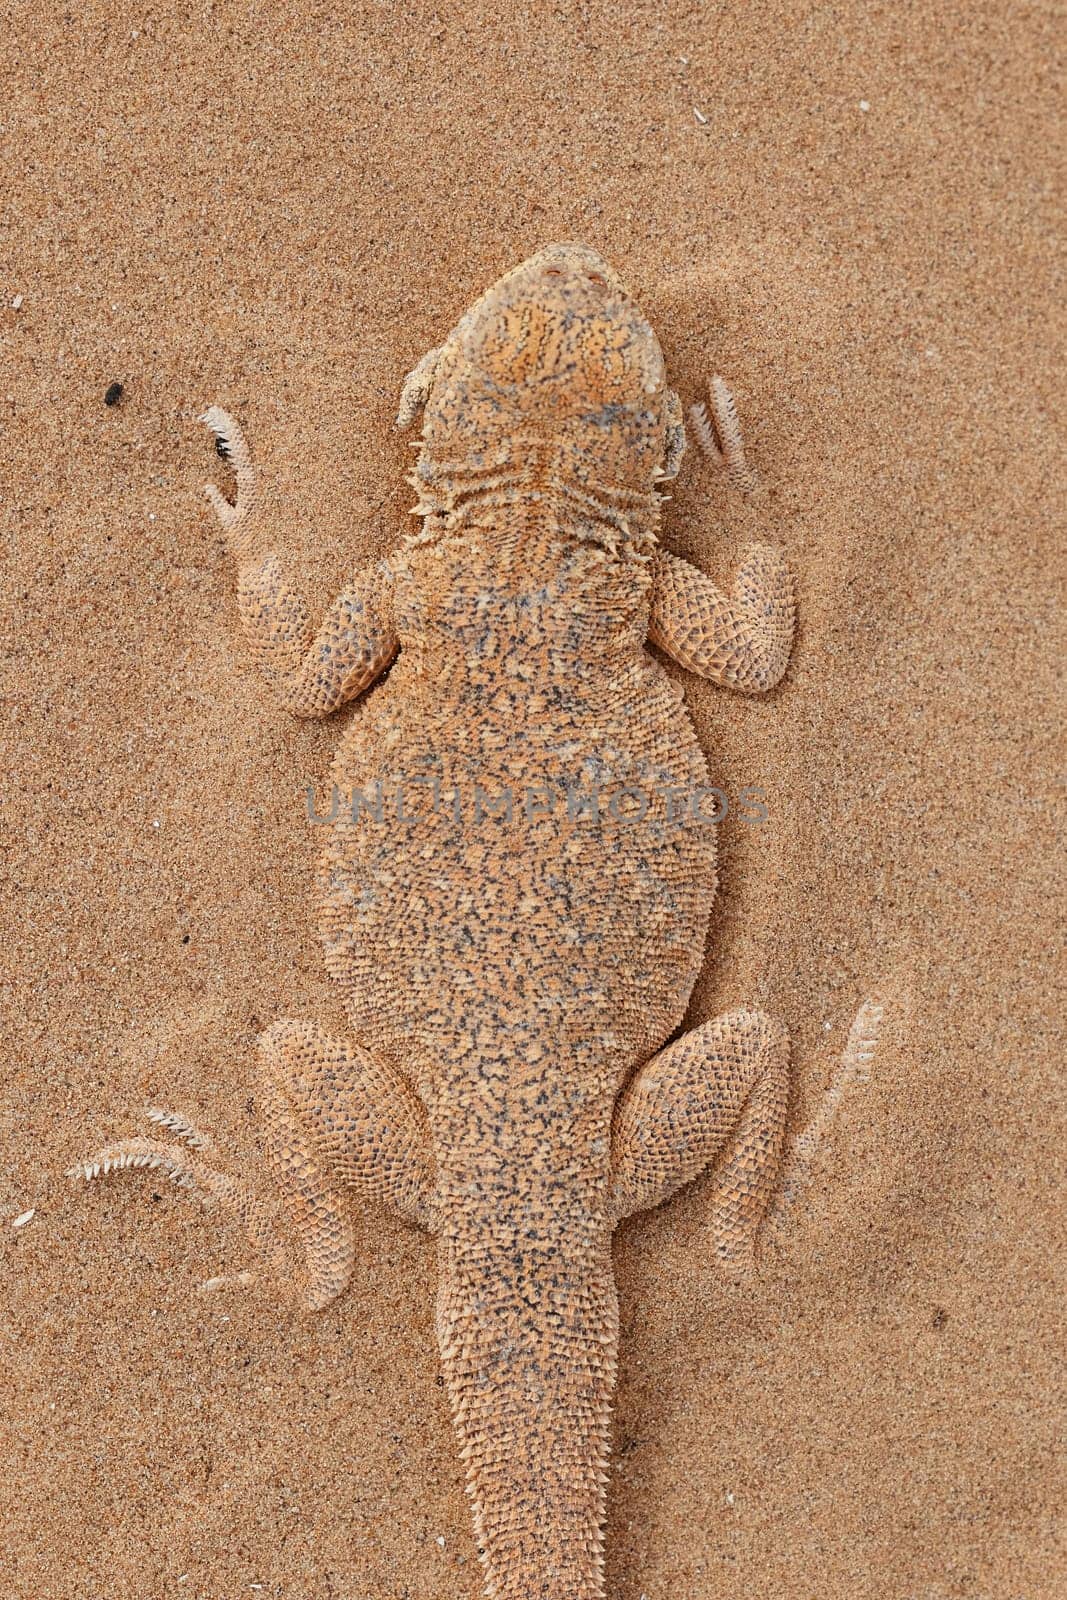 Toad-headed agama Phrynocephalus mystaceus, burrows into the sand in its natural environment. A living dragon of the desert Close up. incredible desert lizard by EvgeniyQW